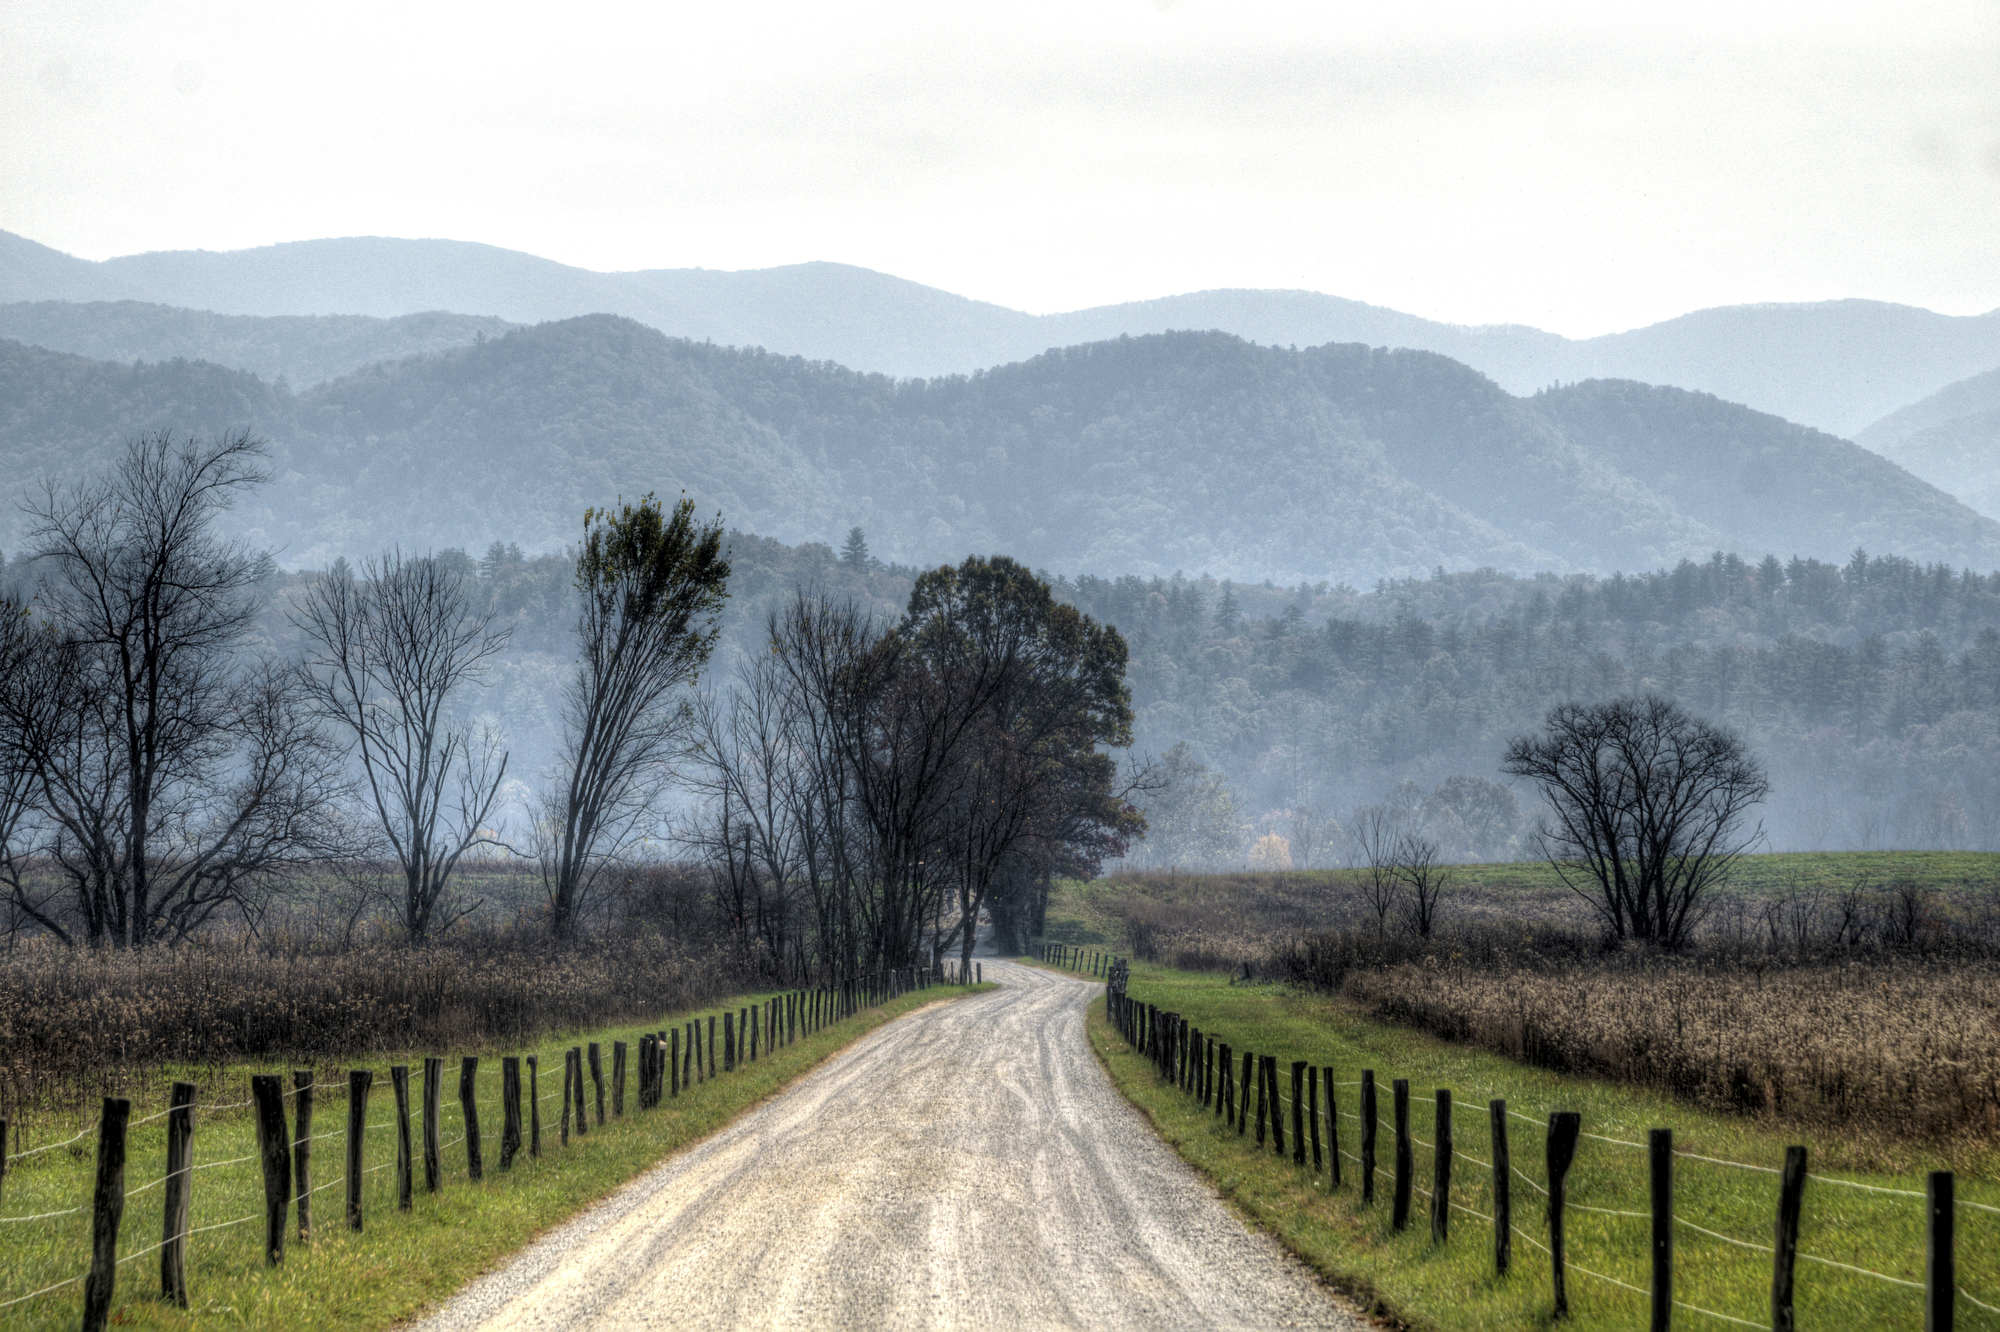 A long gravel road with rustic wooden fences on both sides and mountain peaks in the distance in Cades Cove in Great Smoky Mountains National Park.